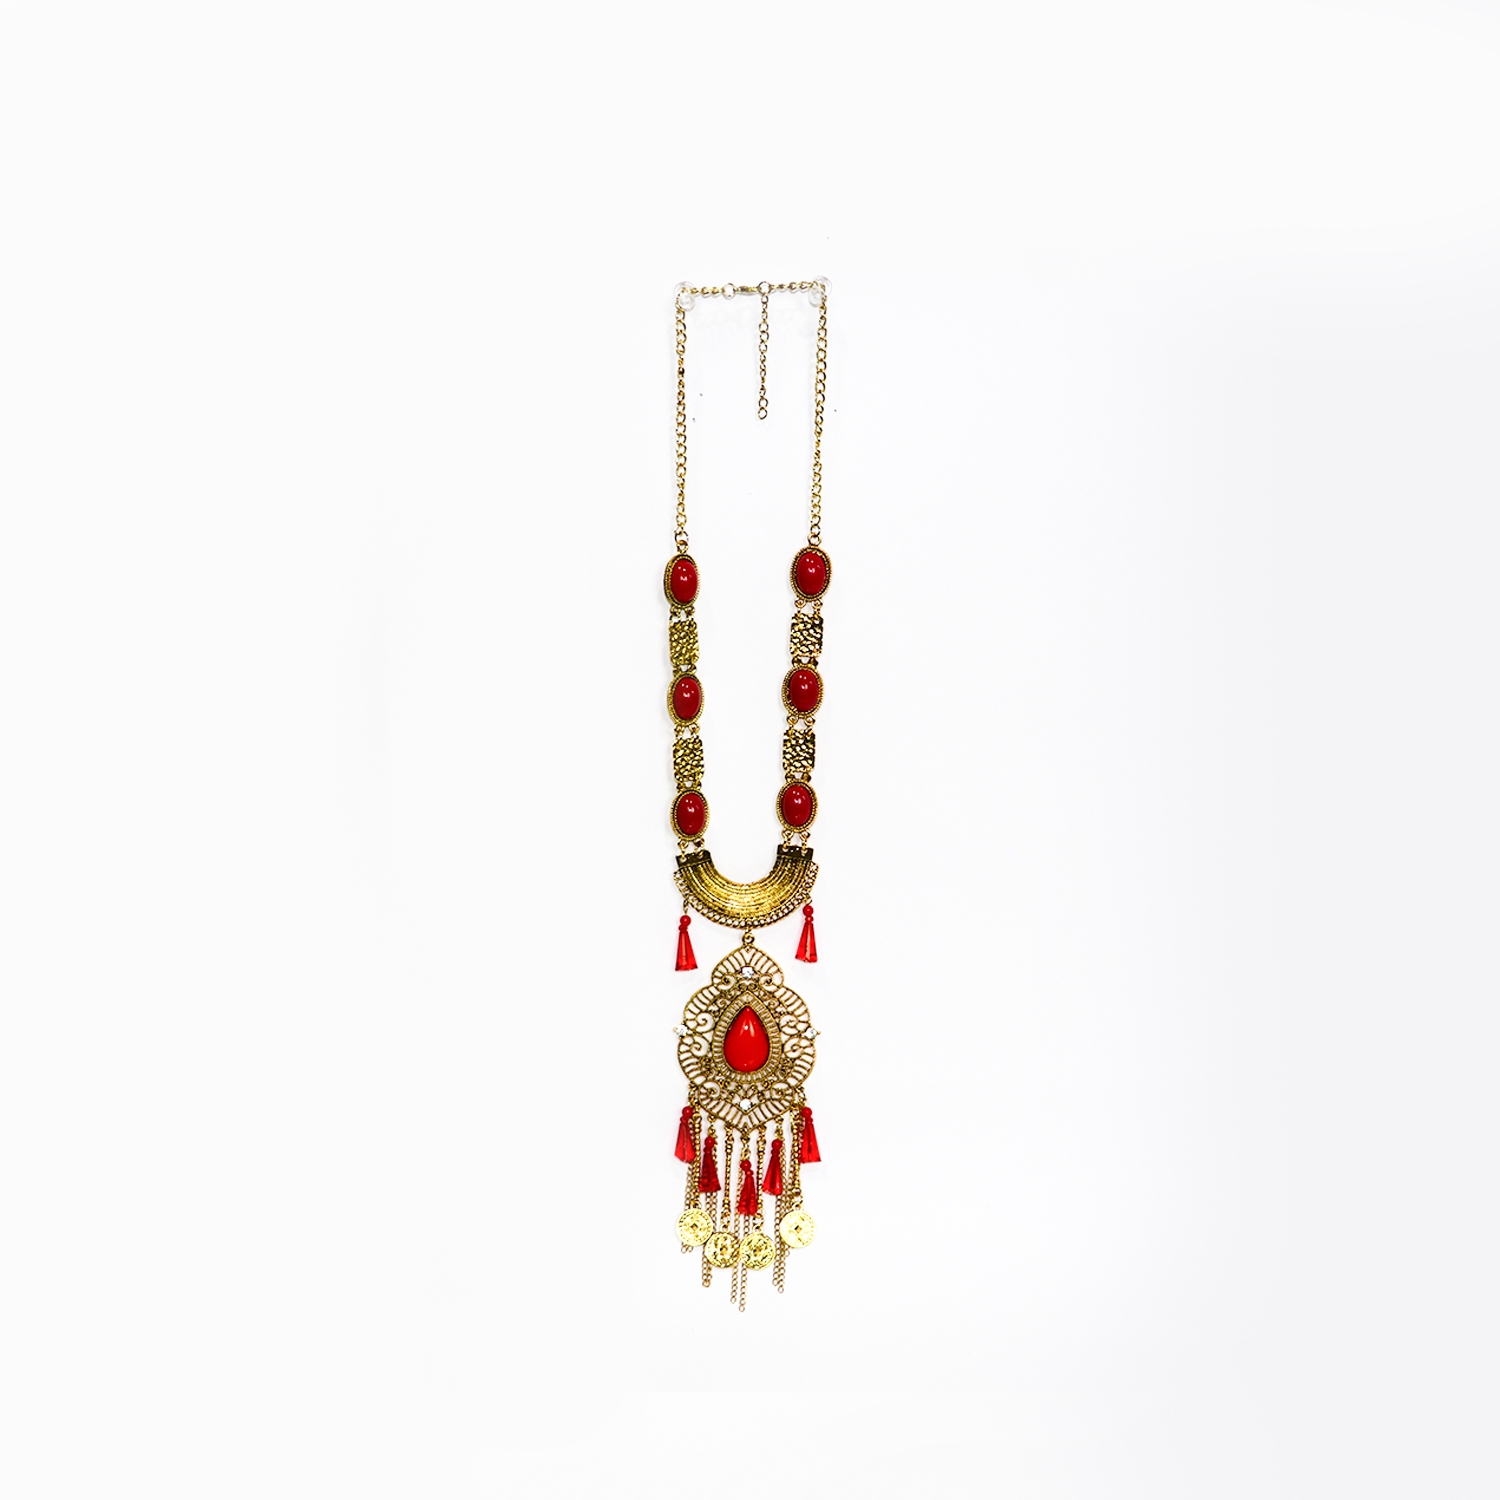 EMM | EMM's Stylish Red Necklace For Women And Girls